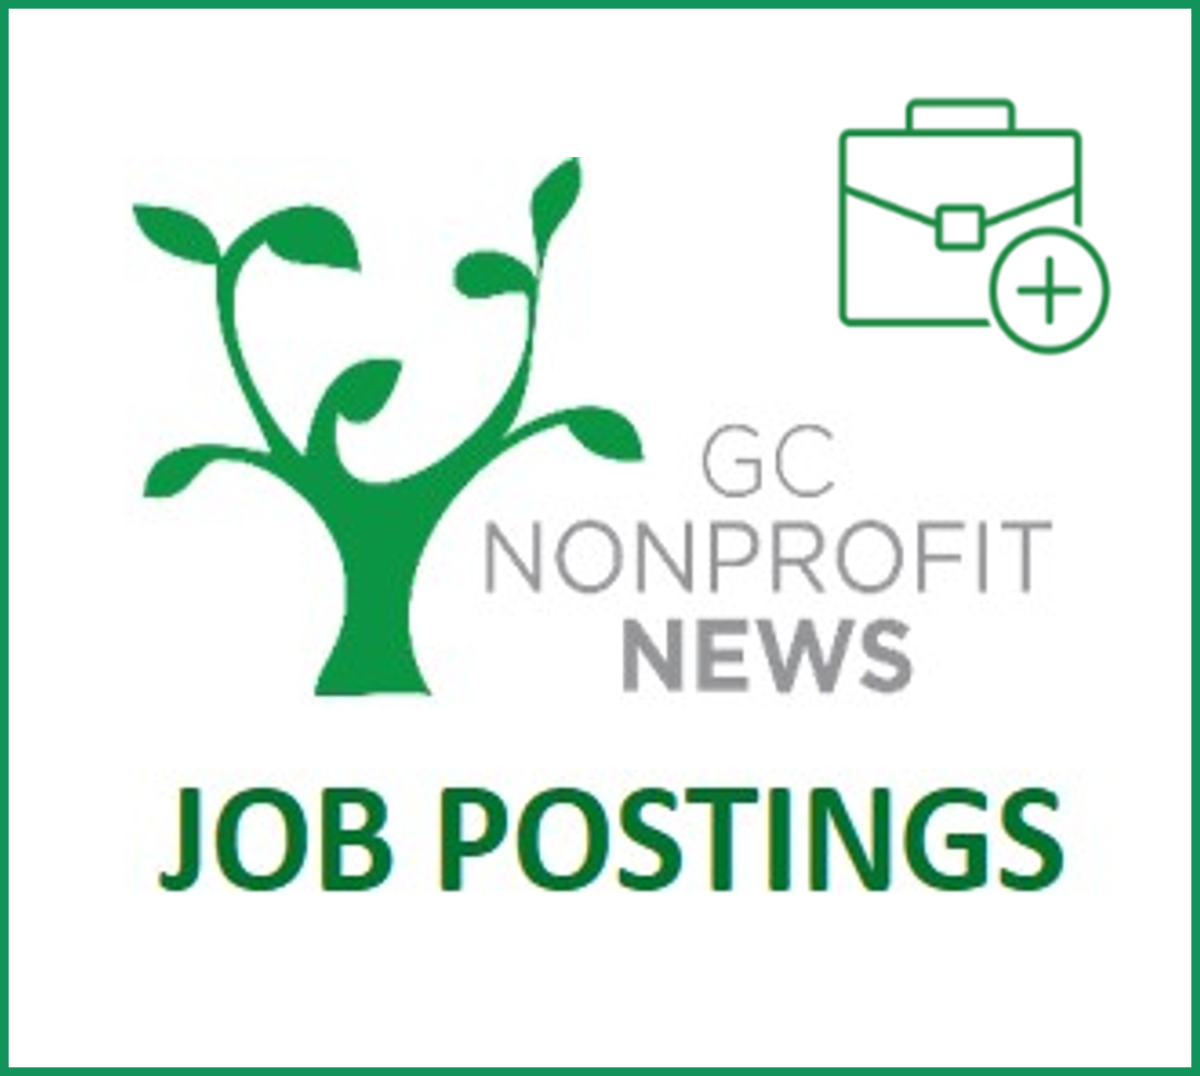 Special Jobs Issue, GC Nonprofit News